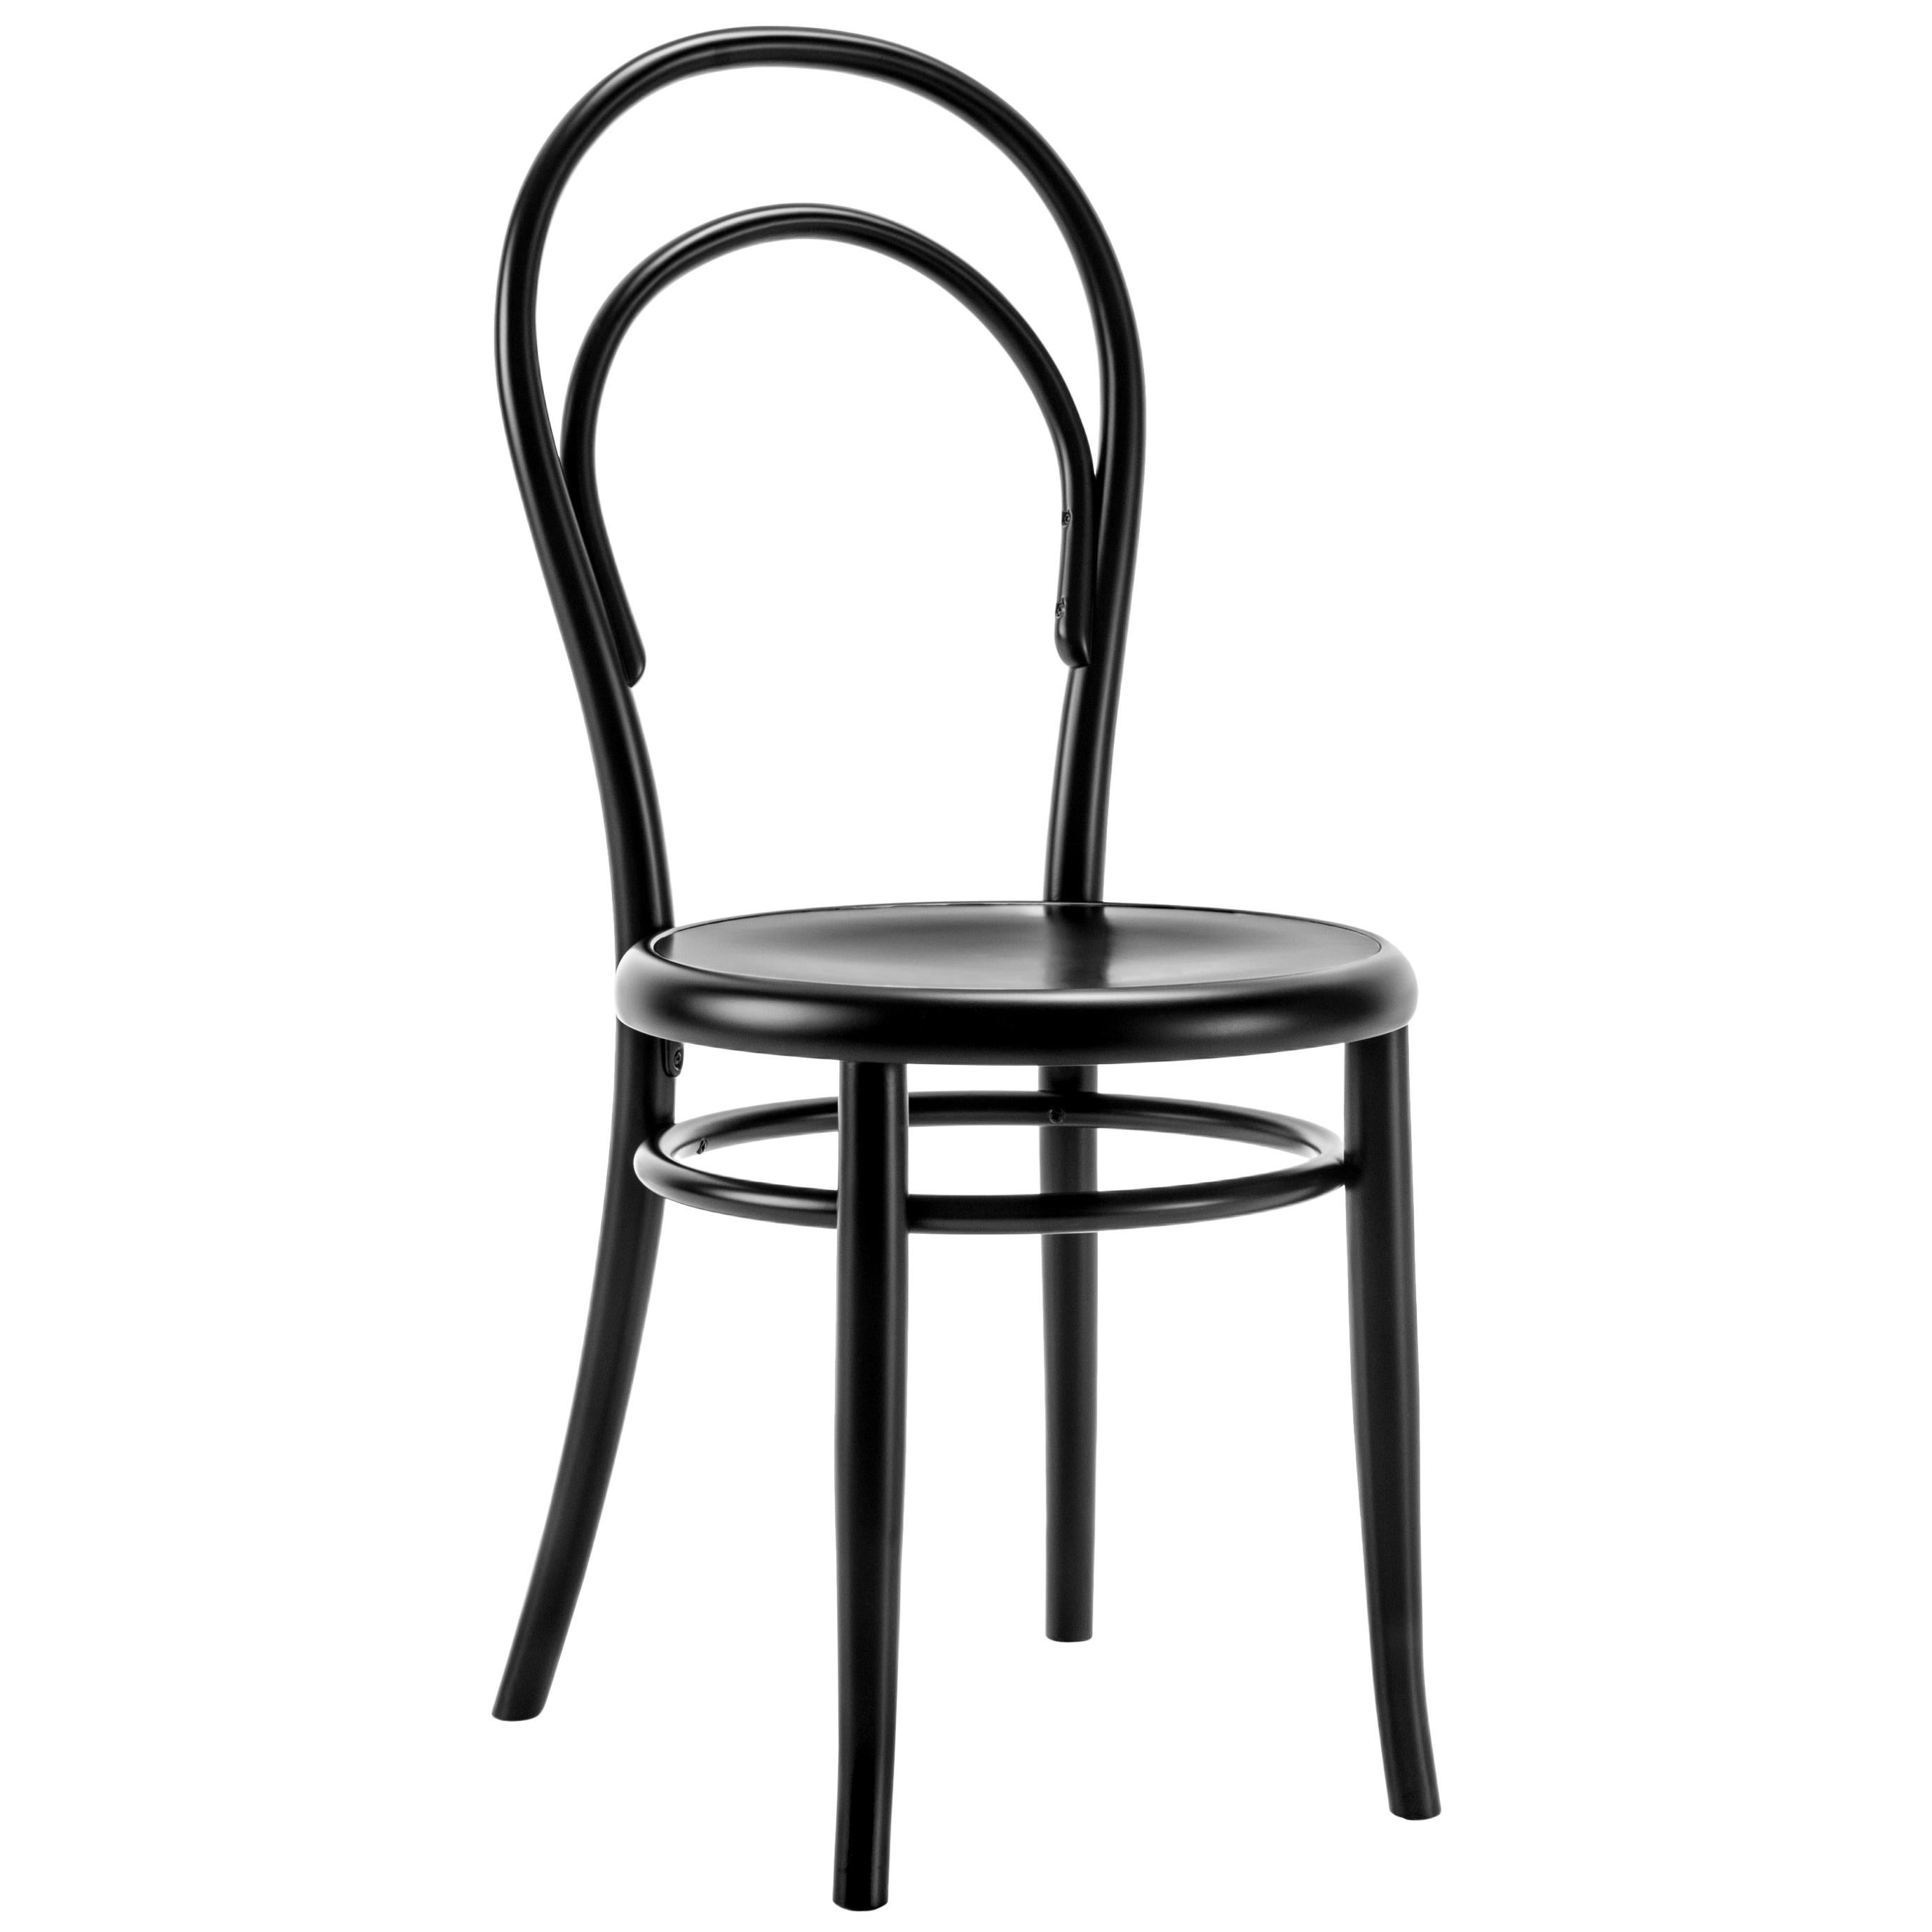 Gebrüder Thonet Vienna GmbH N.14 Chair in Black with Plywood Seat For Sale